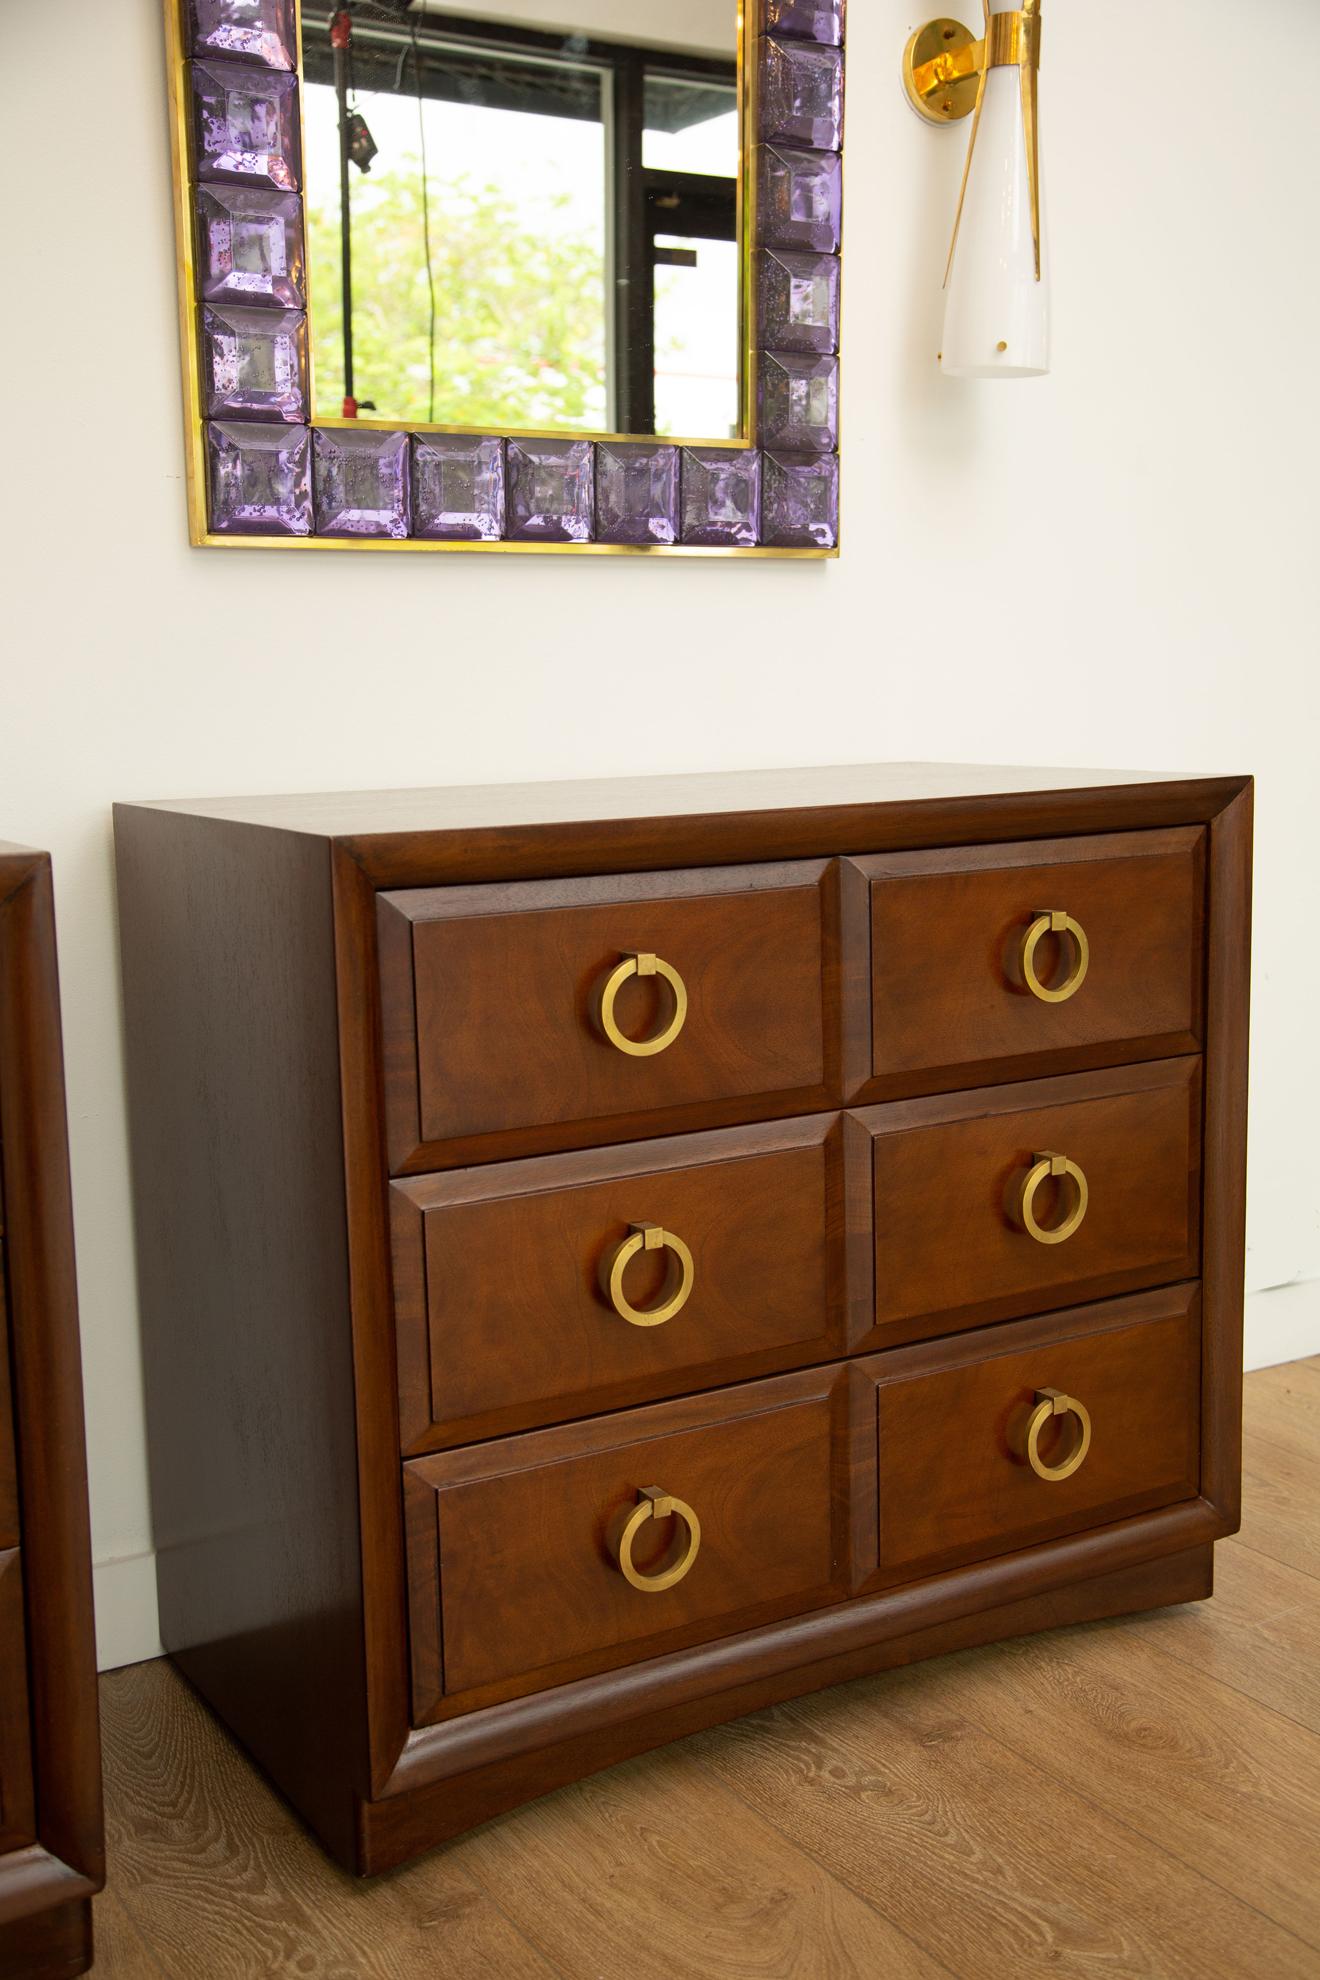 Pair of chest of drawers by T.H Robsjohn Gibbings, USA 1950
Three drawer bedside tables with heavy brass pulls
Walnut ebonized
Label in drawers
Supported by casters for easy moving
Newly restored.
Available to view in situ in our Miami gallery